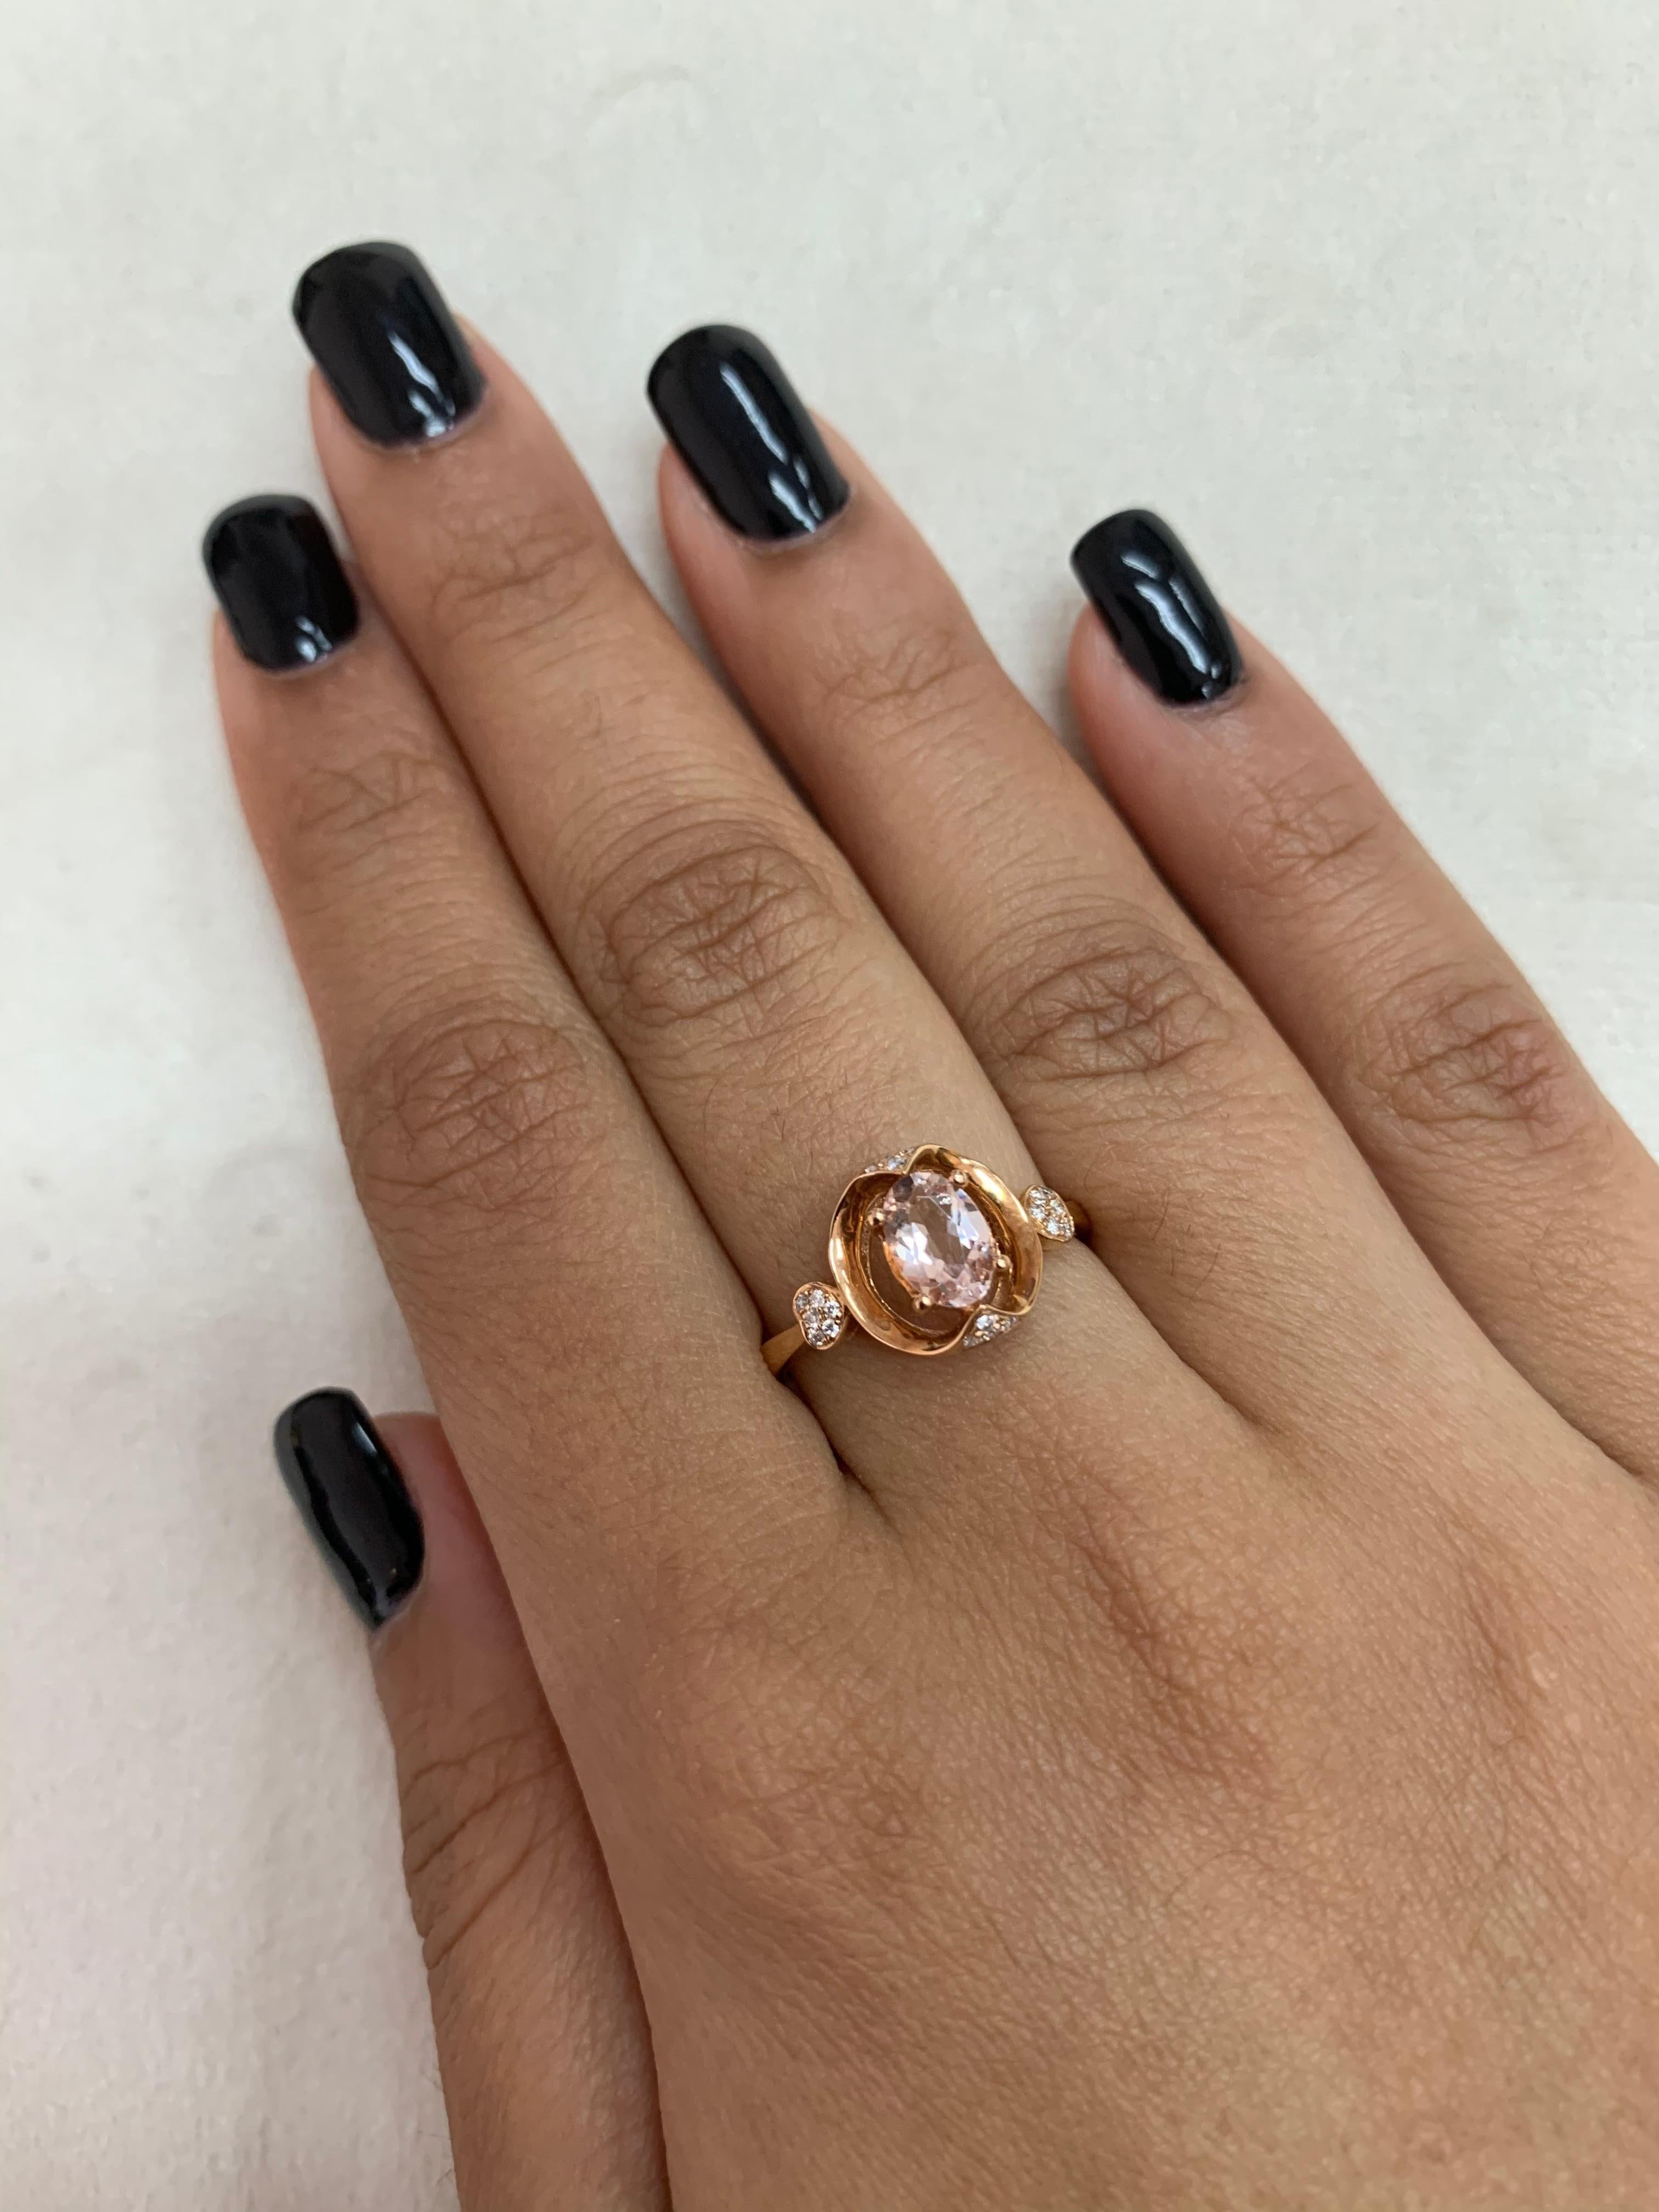 This collection features an array of magnificent morganites! Accented with diamonds these rings are made in rose gold and present a classic yet elegant look. 

Classic morganite ring in 18K rose gold with diamonds. 

Morganite: 0.57 carat oval